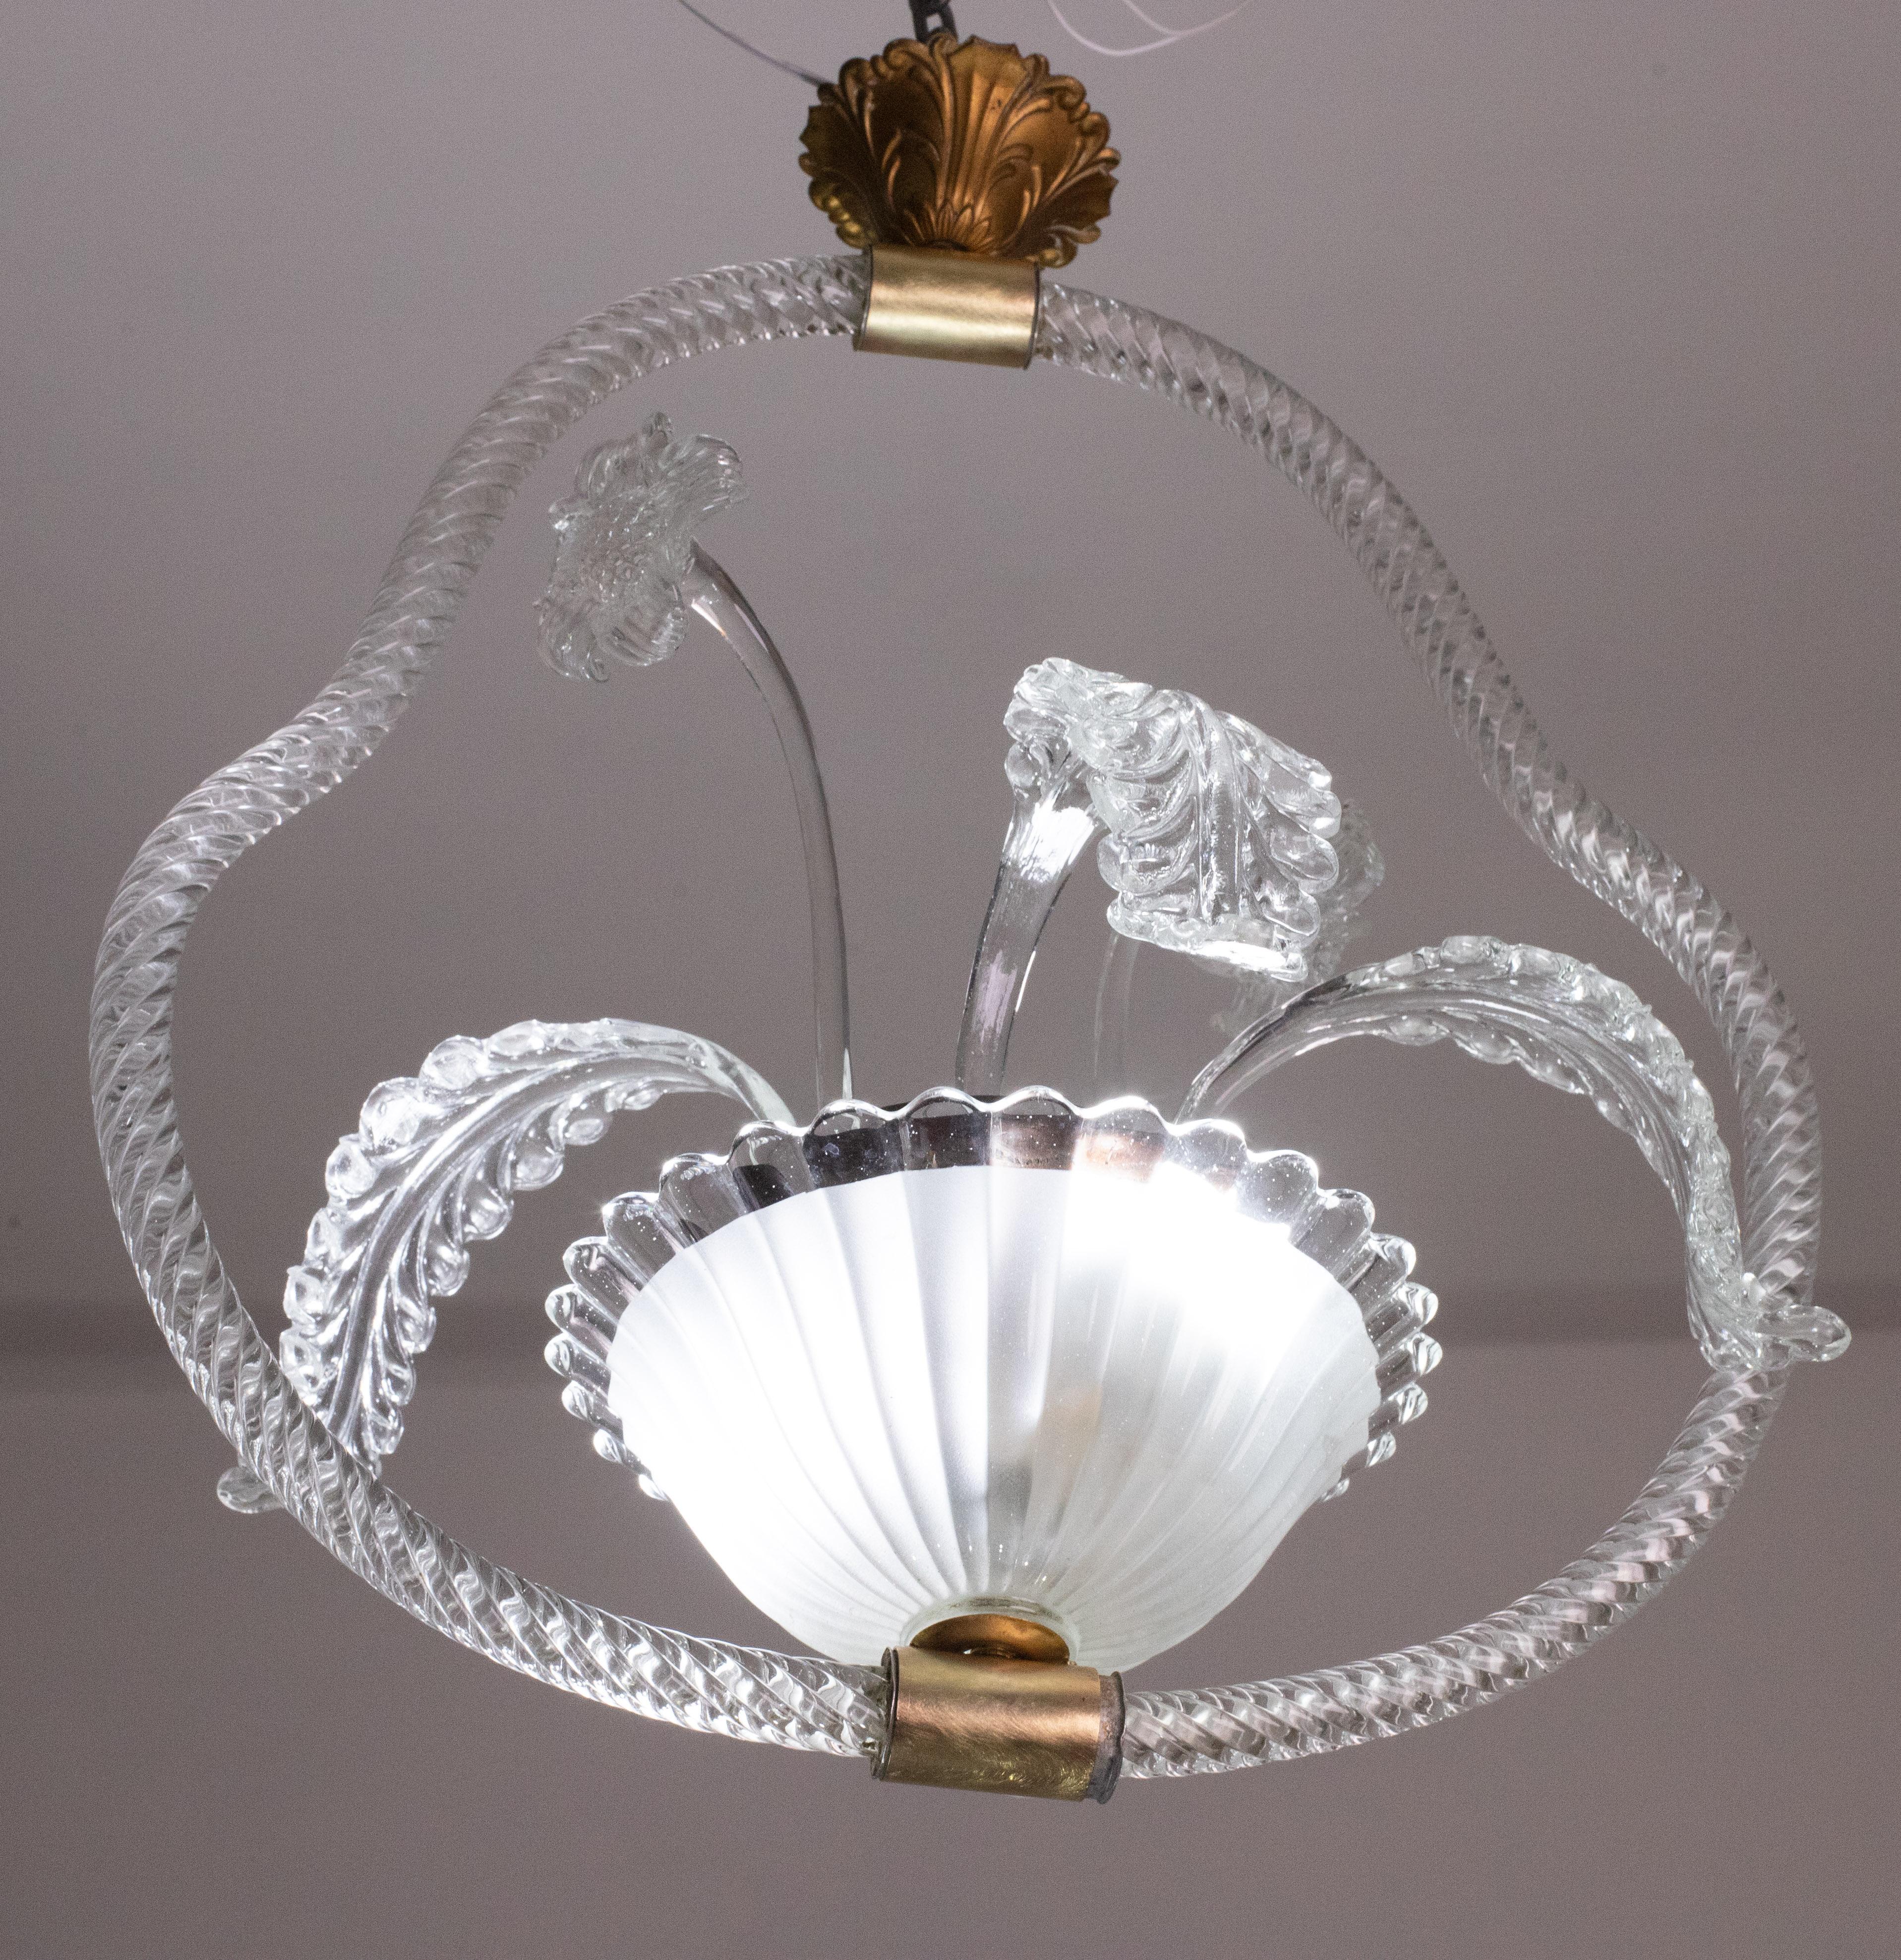 Extraordinary Barovier e Toso Light with Flowers, 1940s For Sale 4